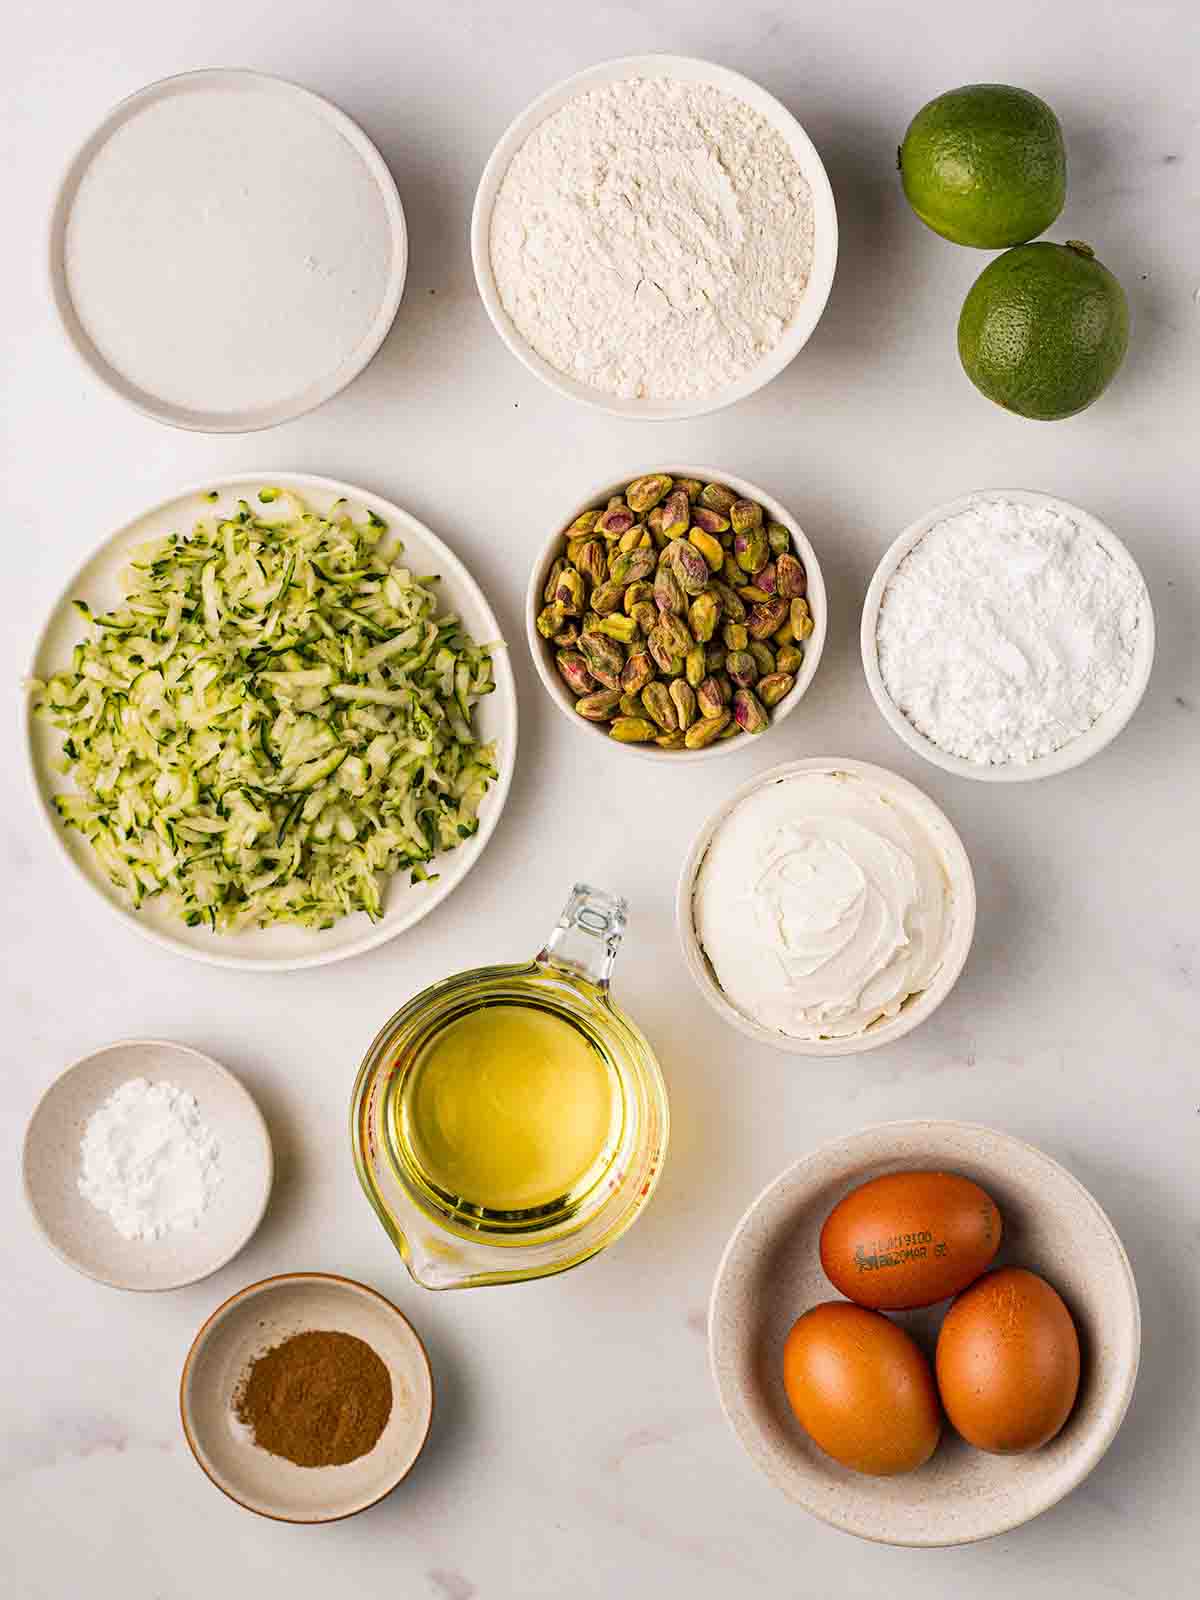 The ingredients for making a Courgette Cake, measured out in bowls on a white surface.